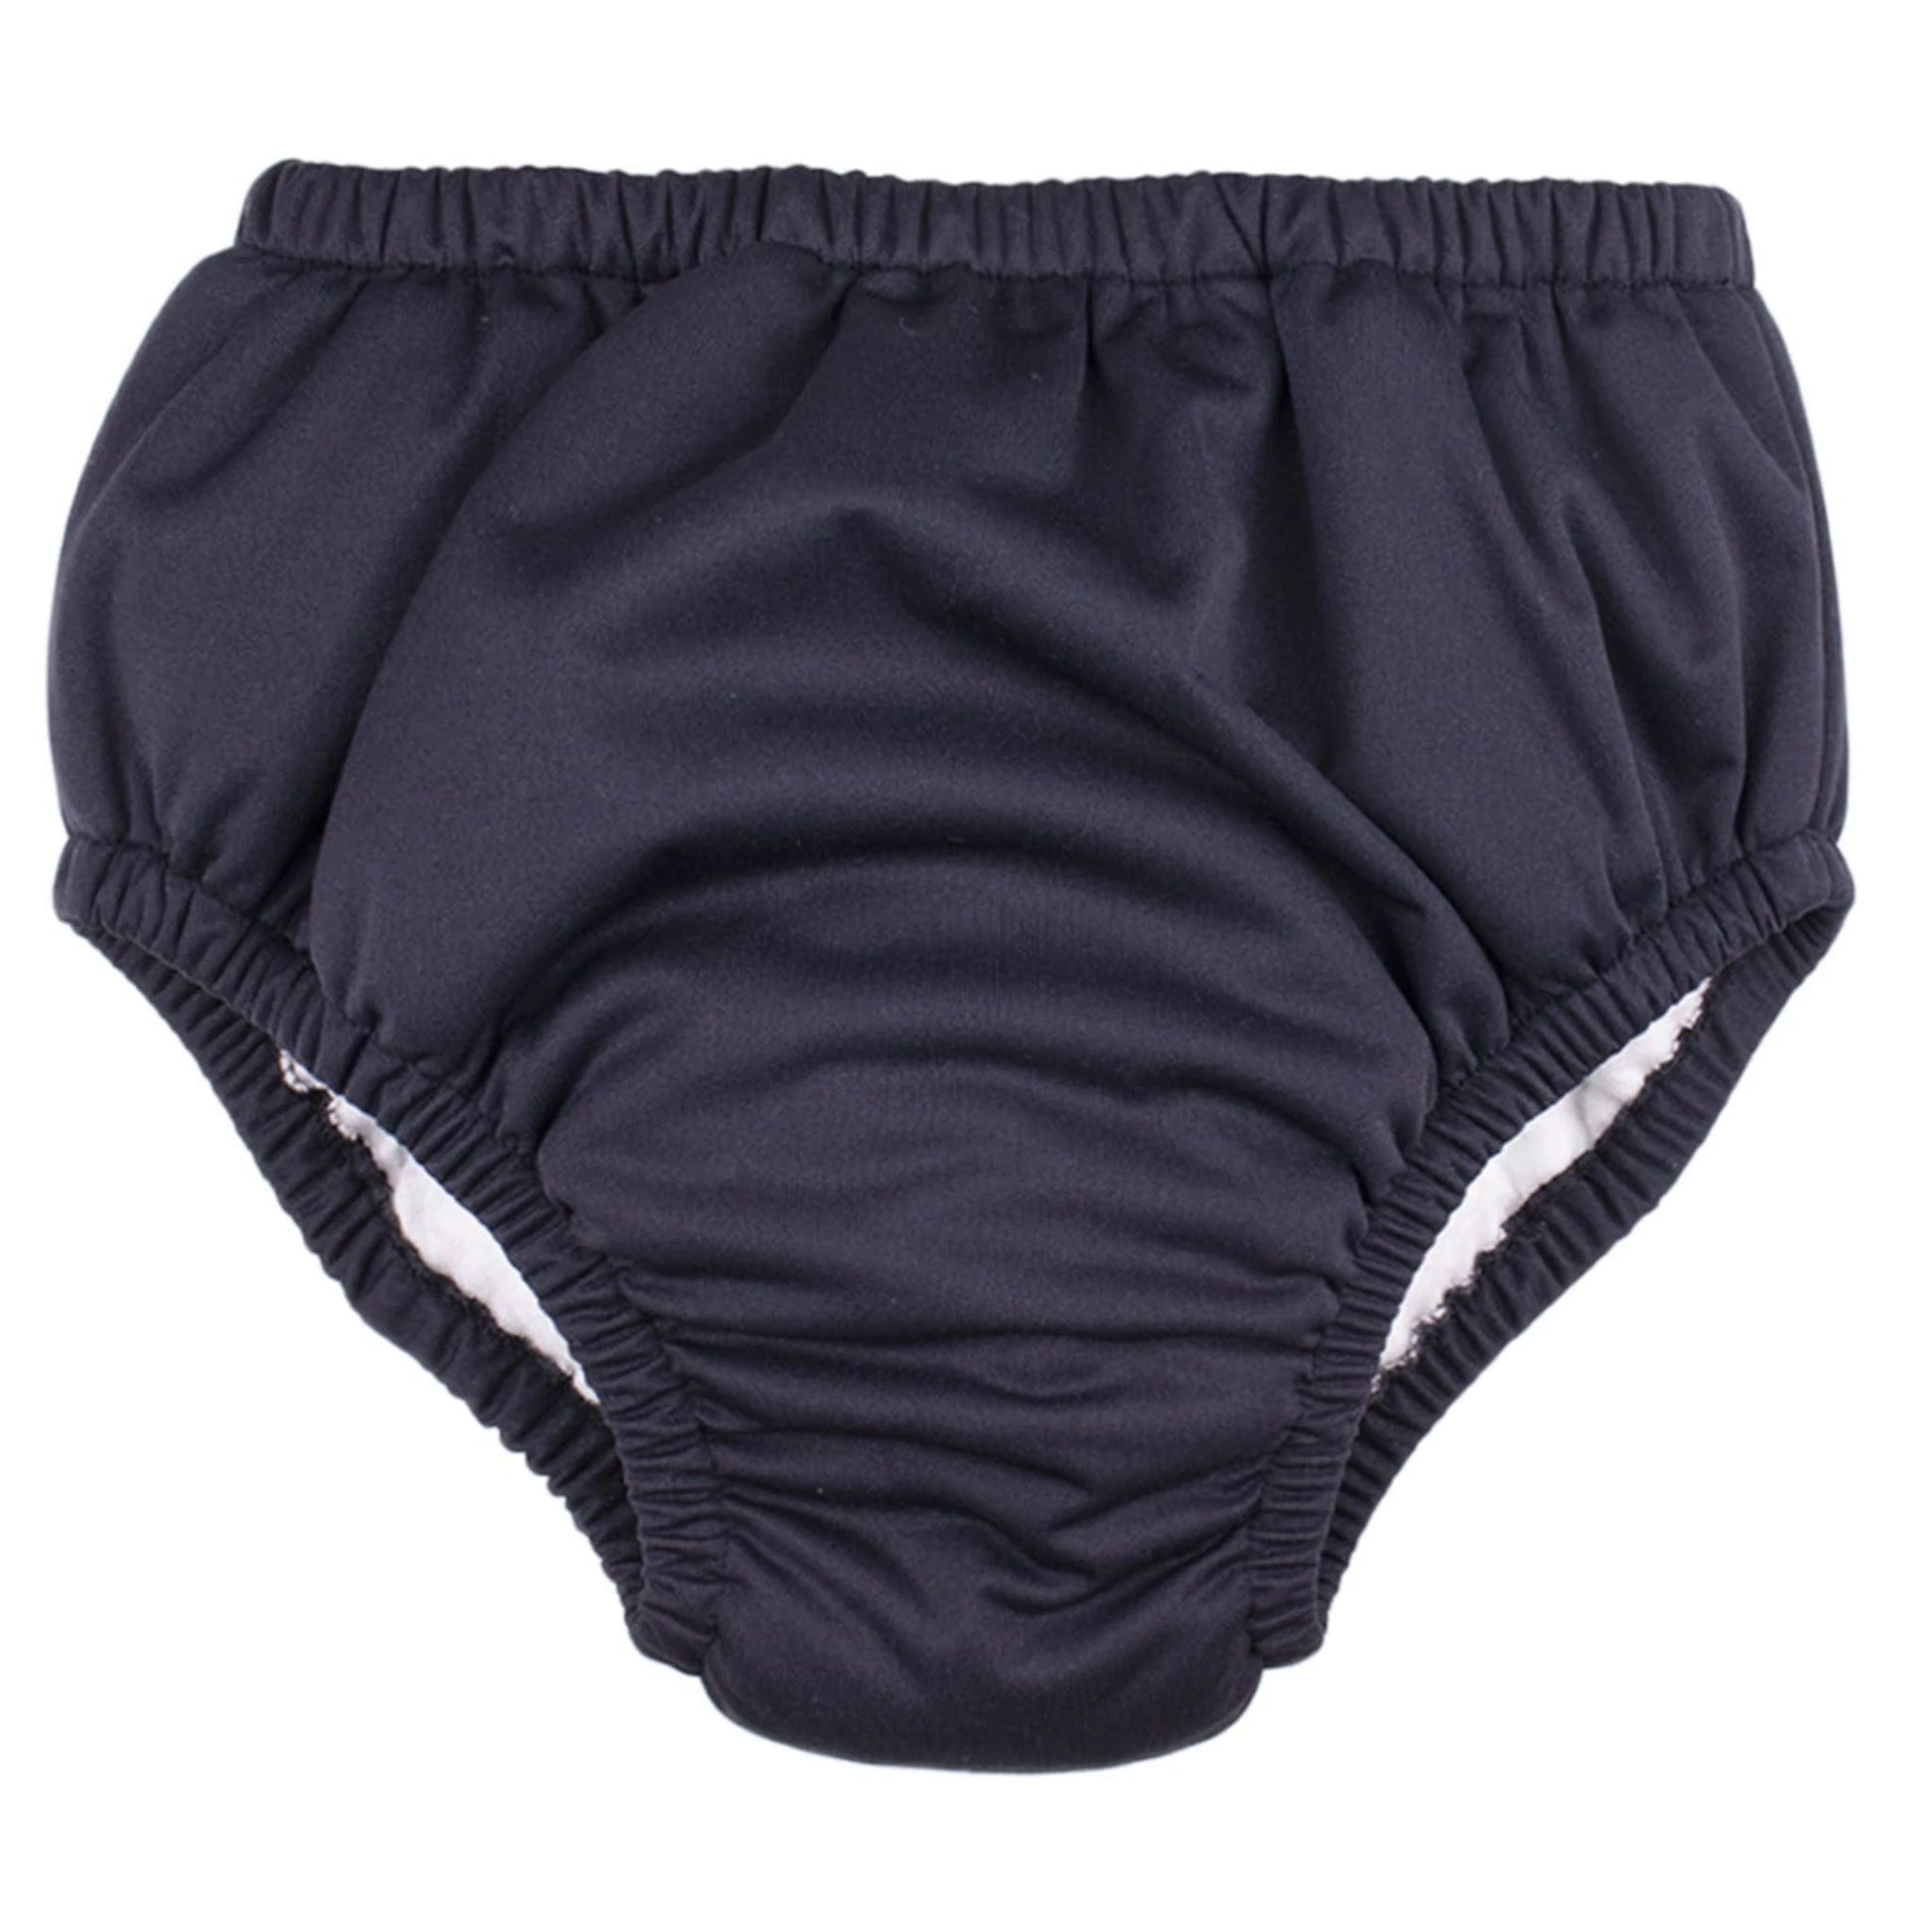 Kids Pullup Reusable Night Incontinence Underwear (600ml) - Caring Clothing